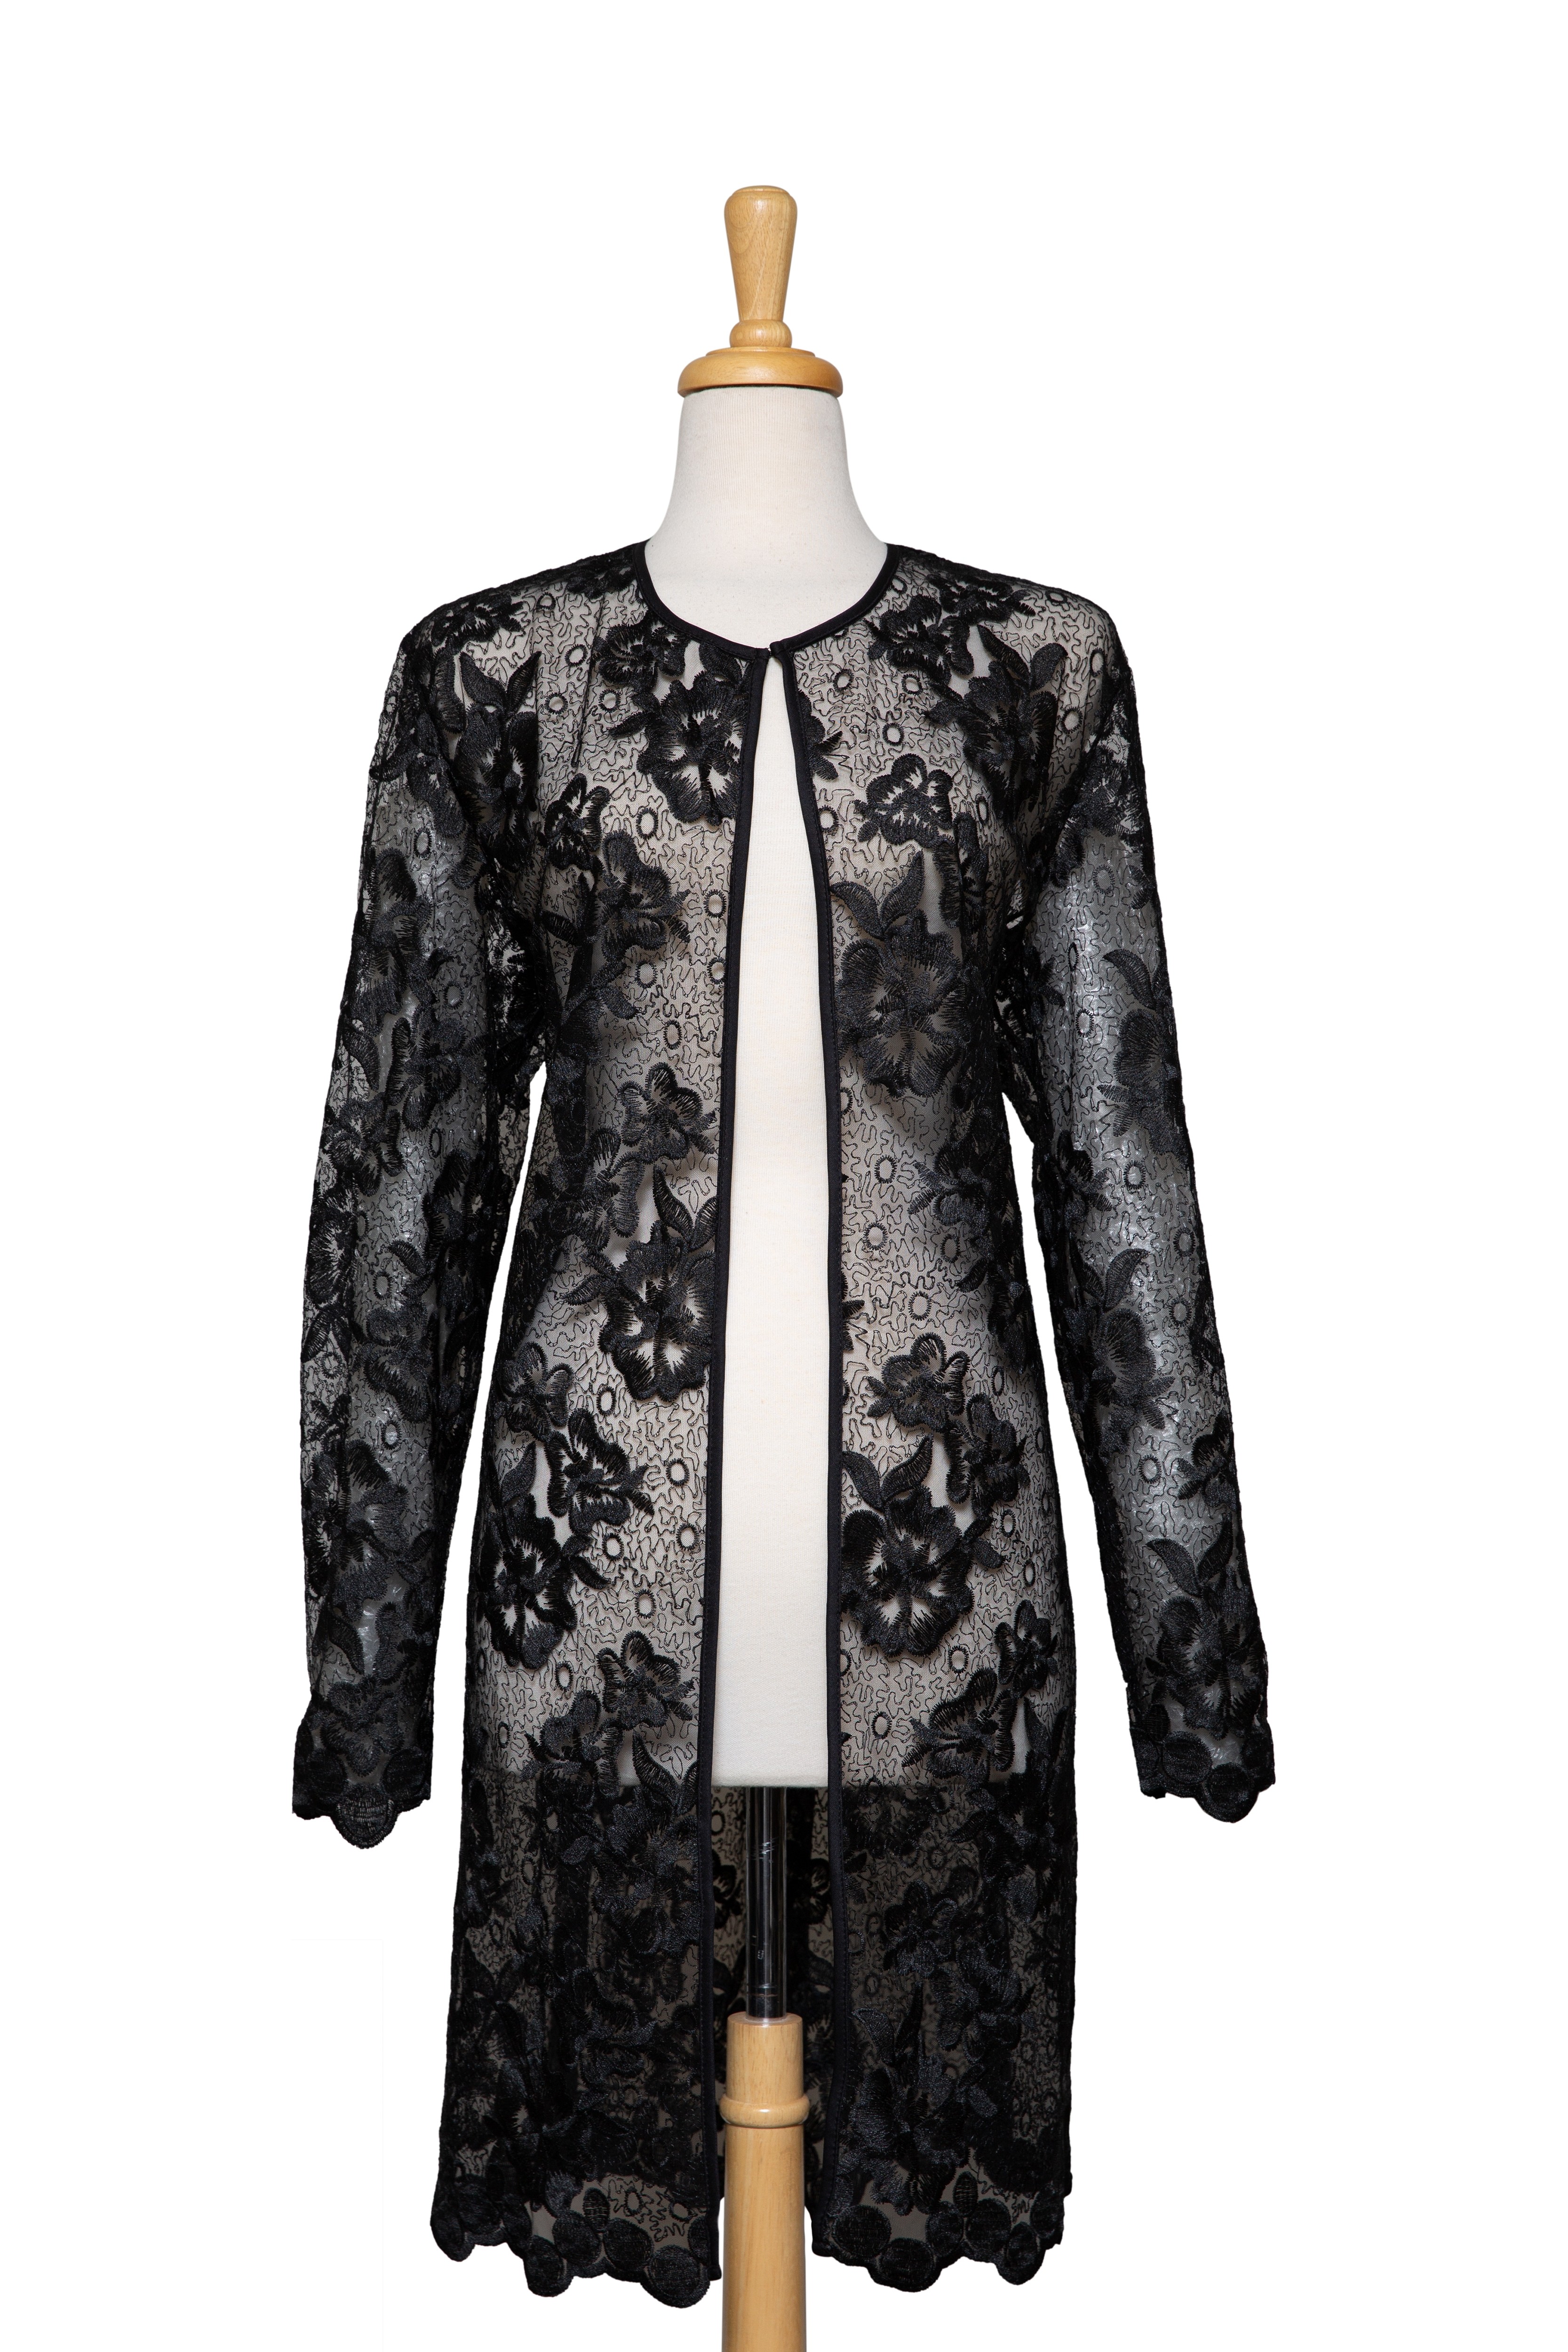 Thin Black Floral Embroidered Floral 3/4 Length Lace Jacket 